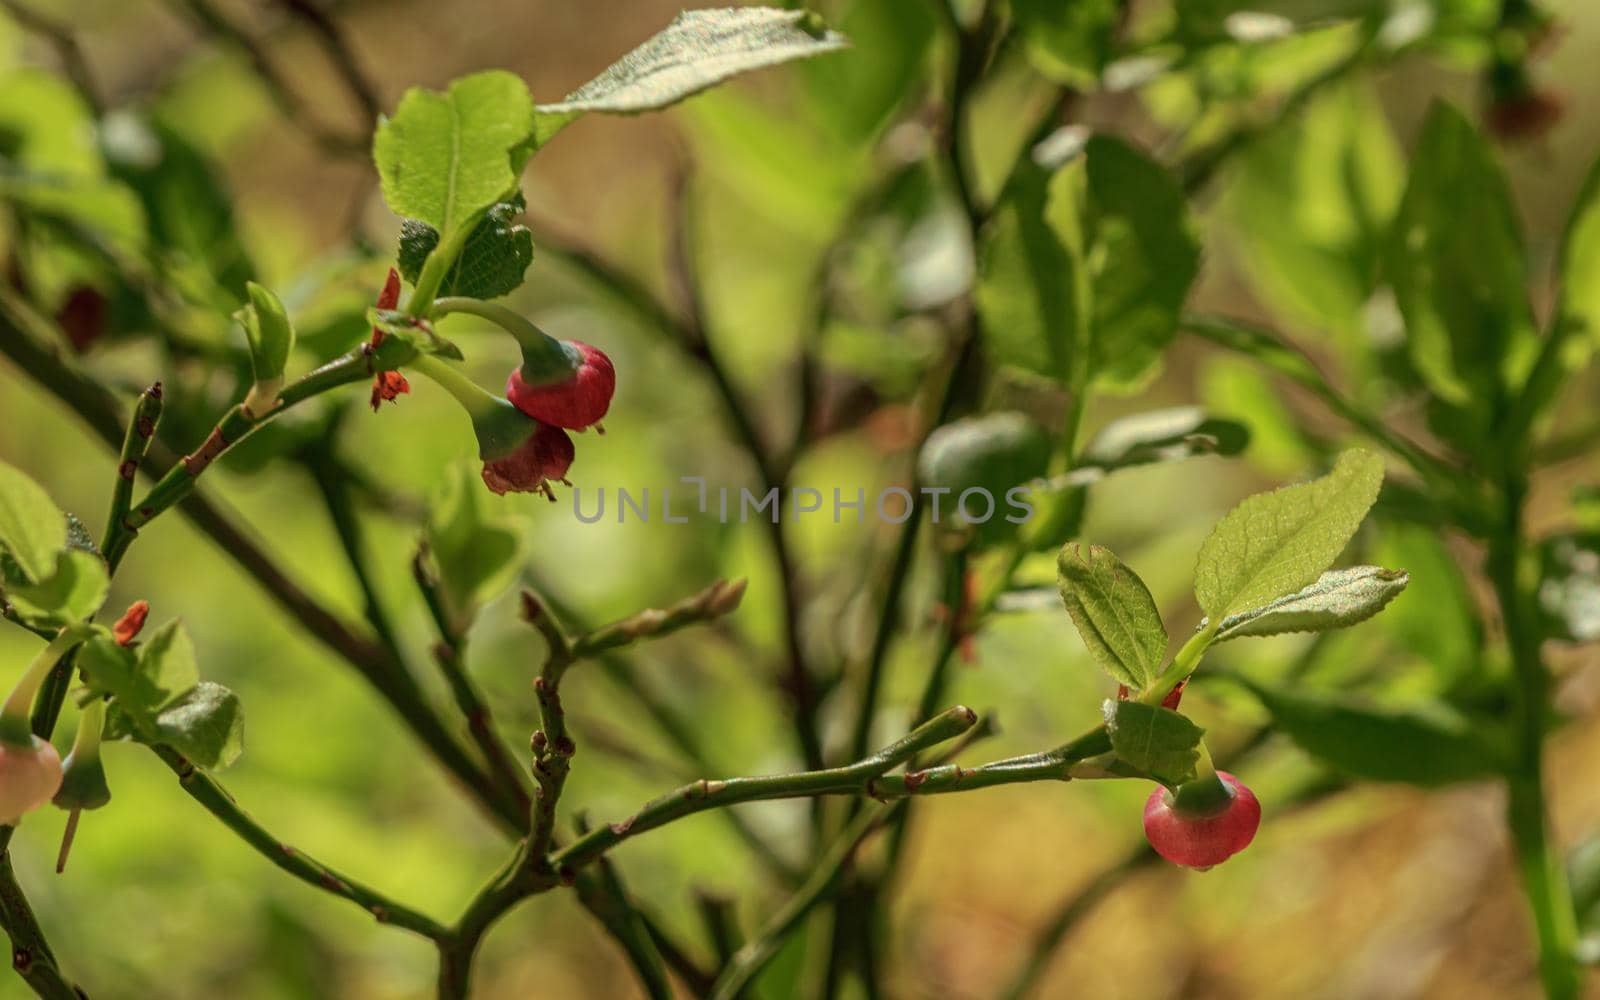 Blooming blueberry plants in green forest